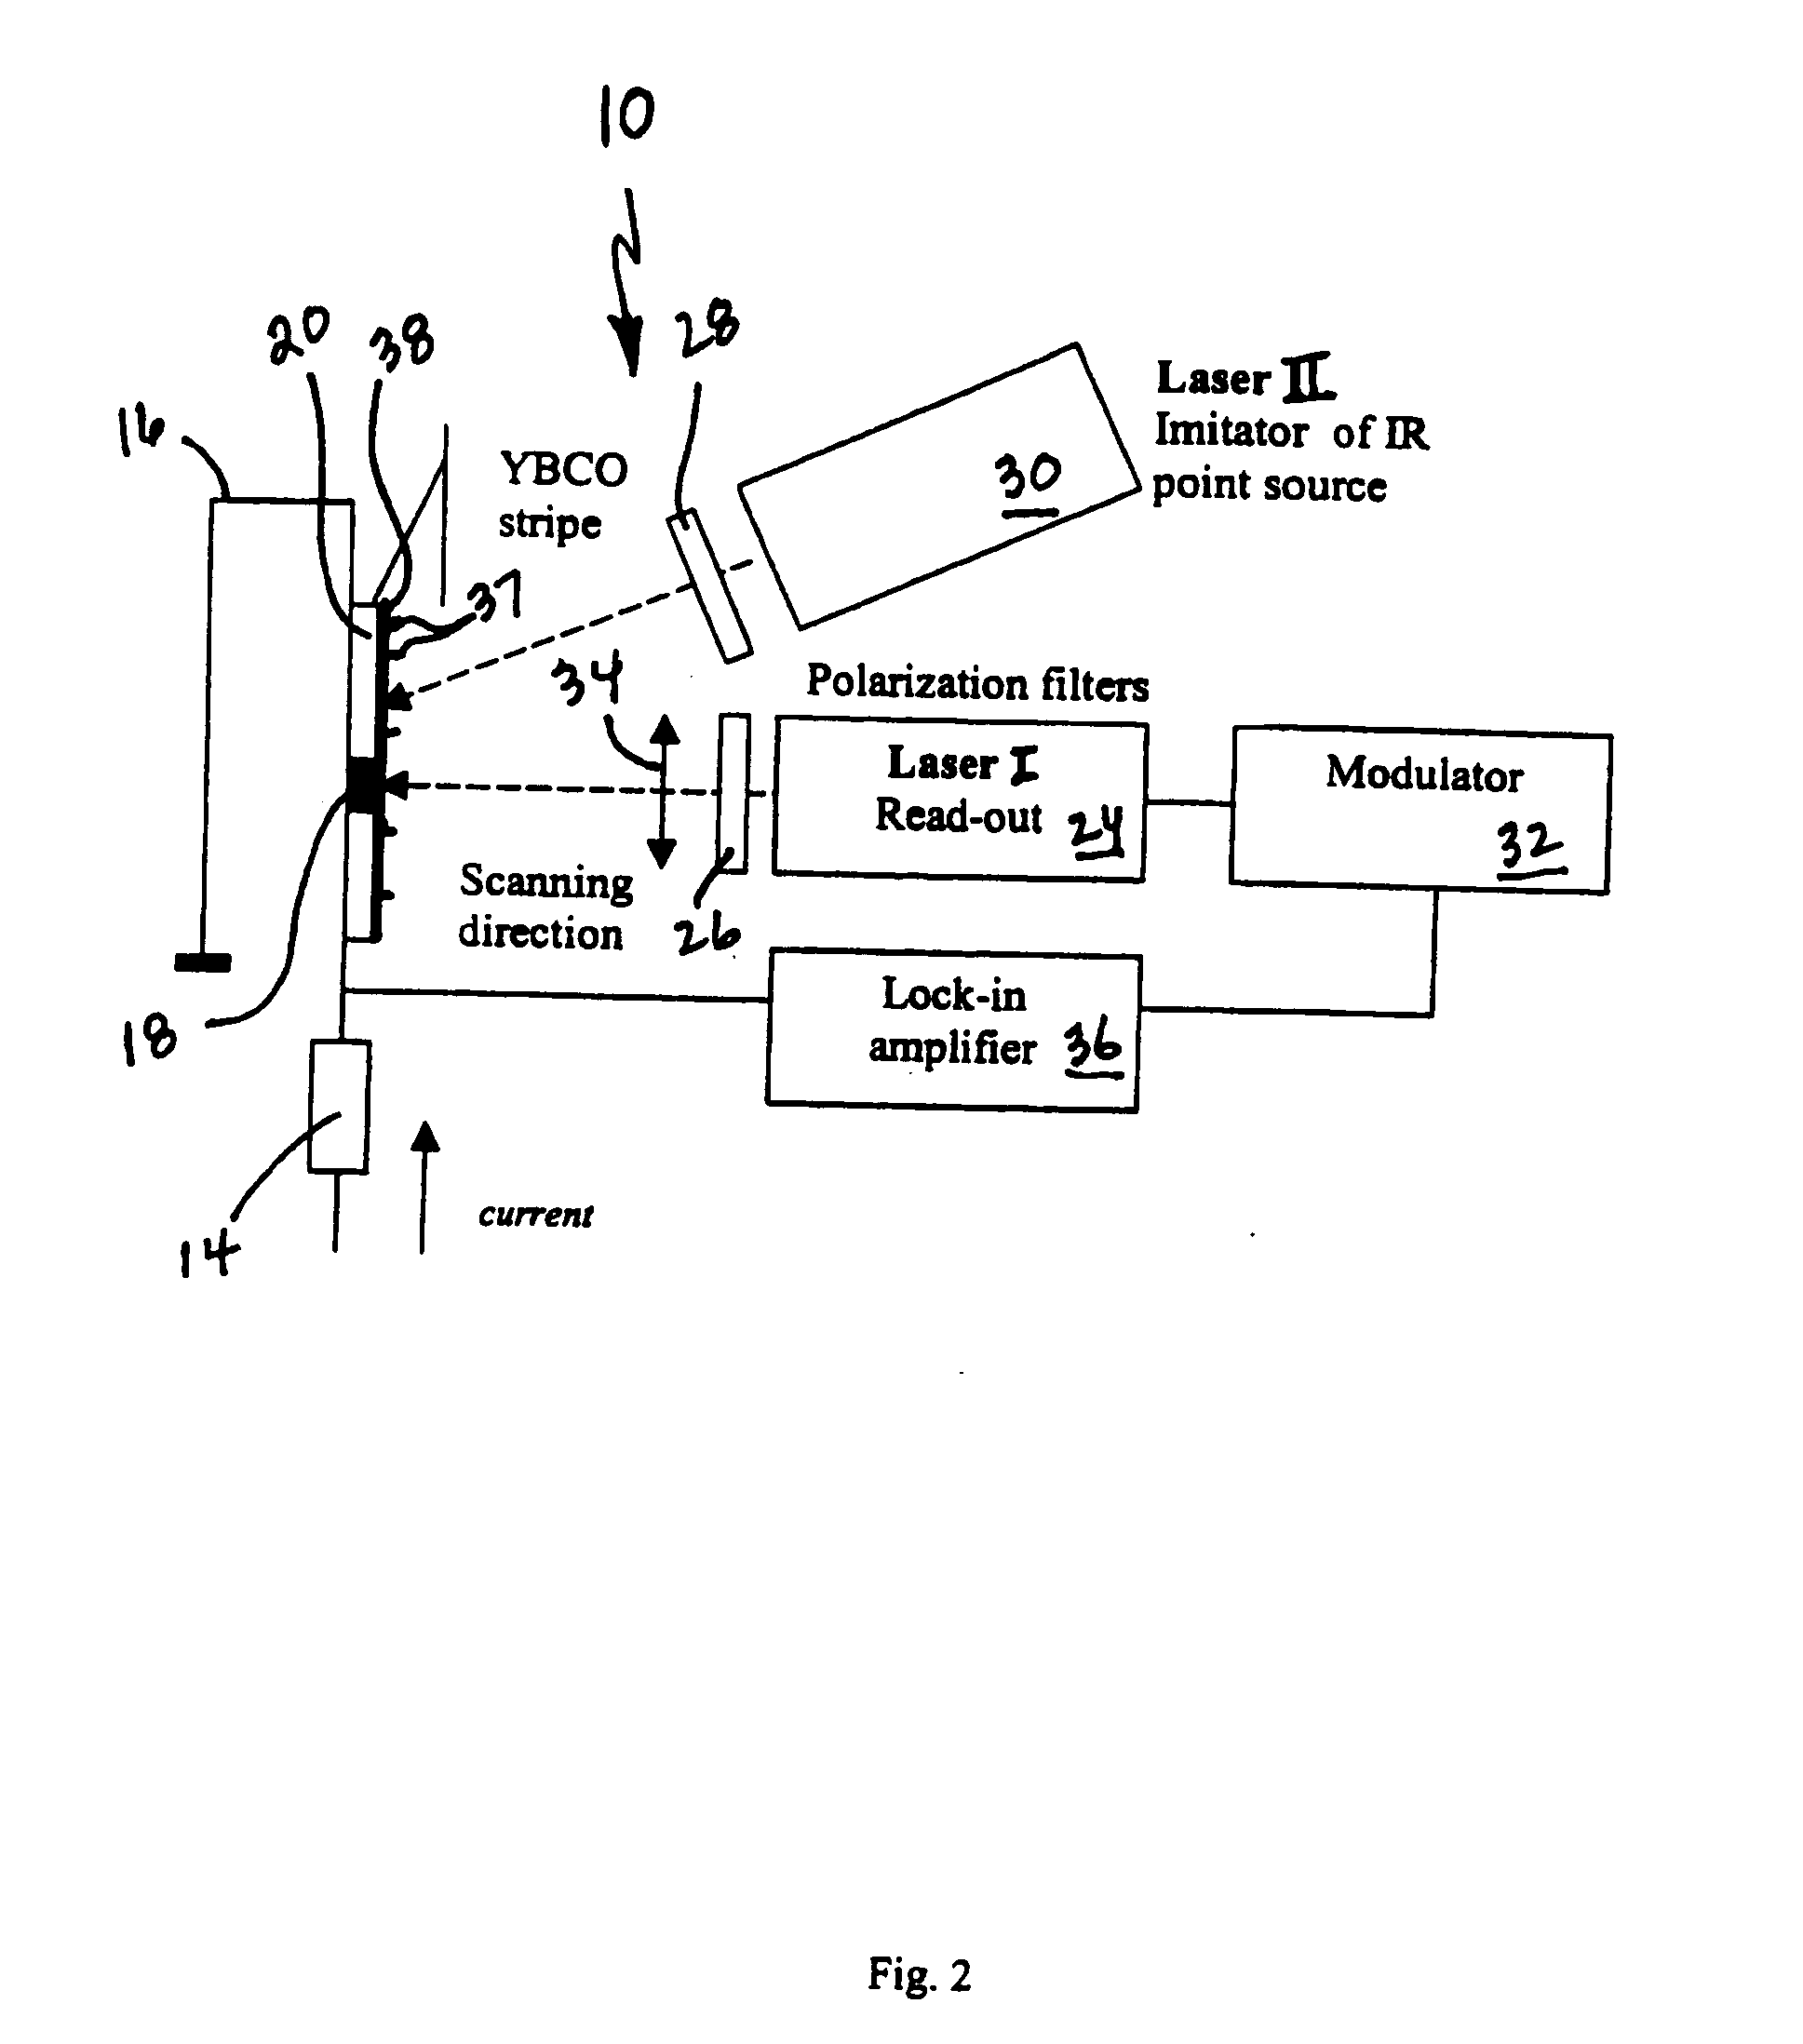 Method for detection and imaging over a broad spectral range